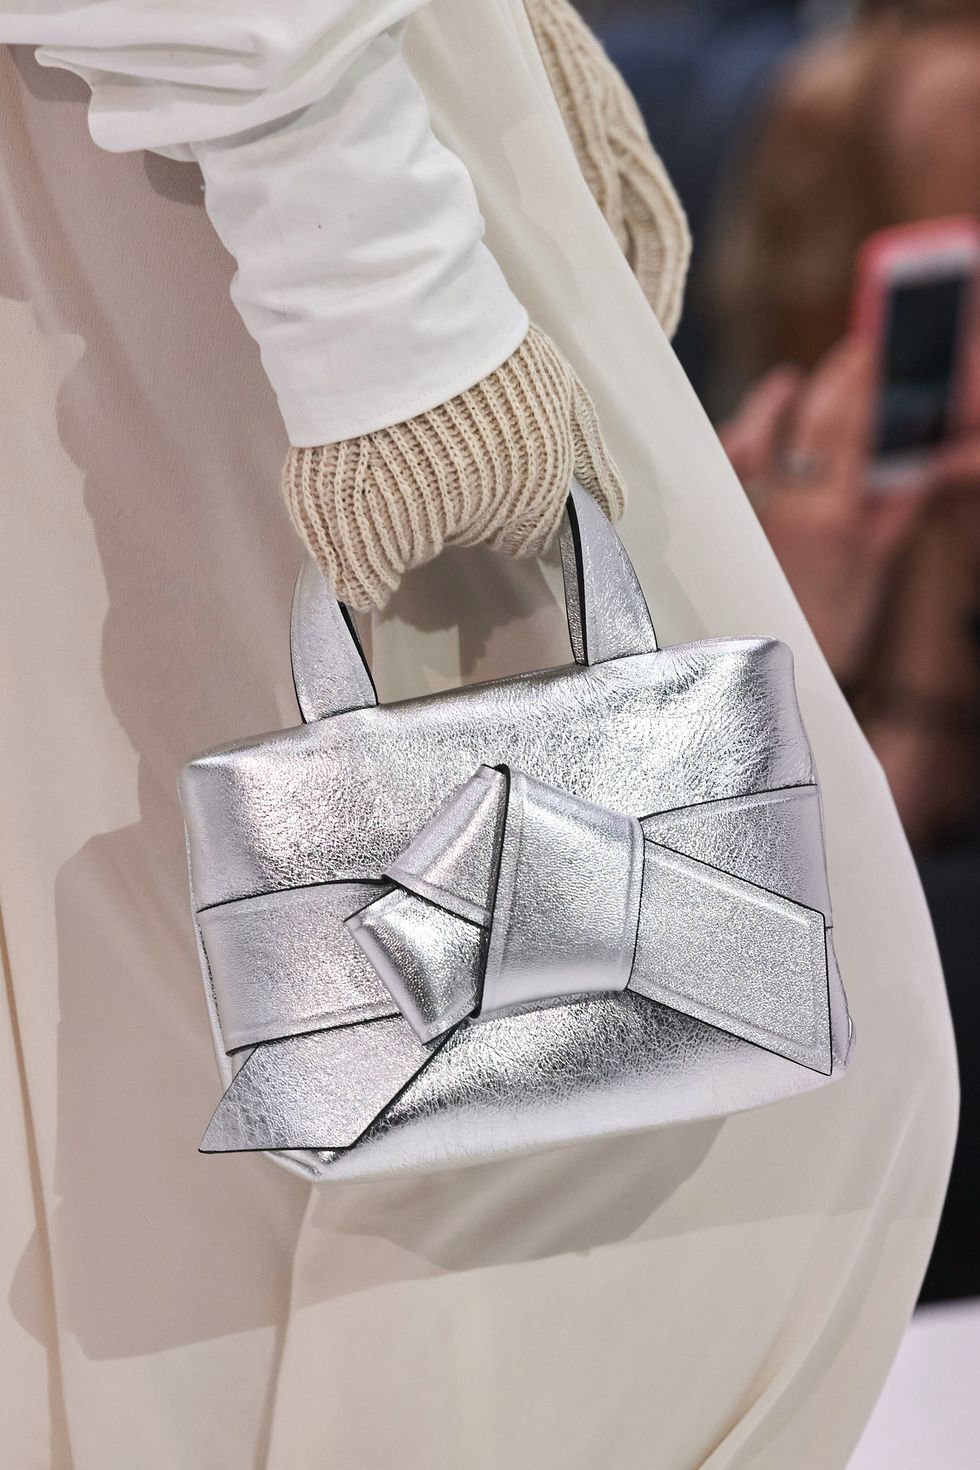 A Guide To The Newest Fall/Winter 2022 Designer Bags